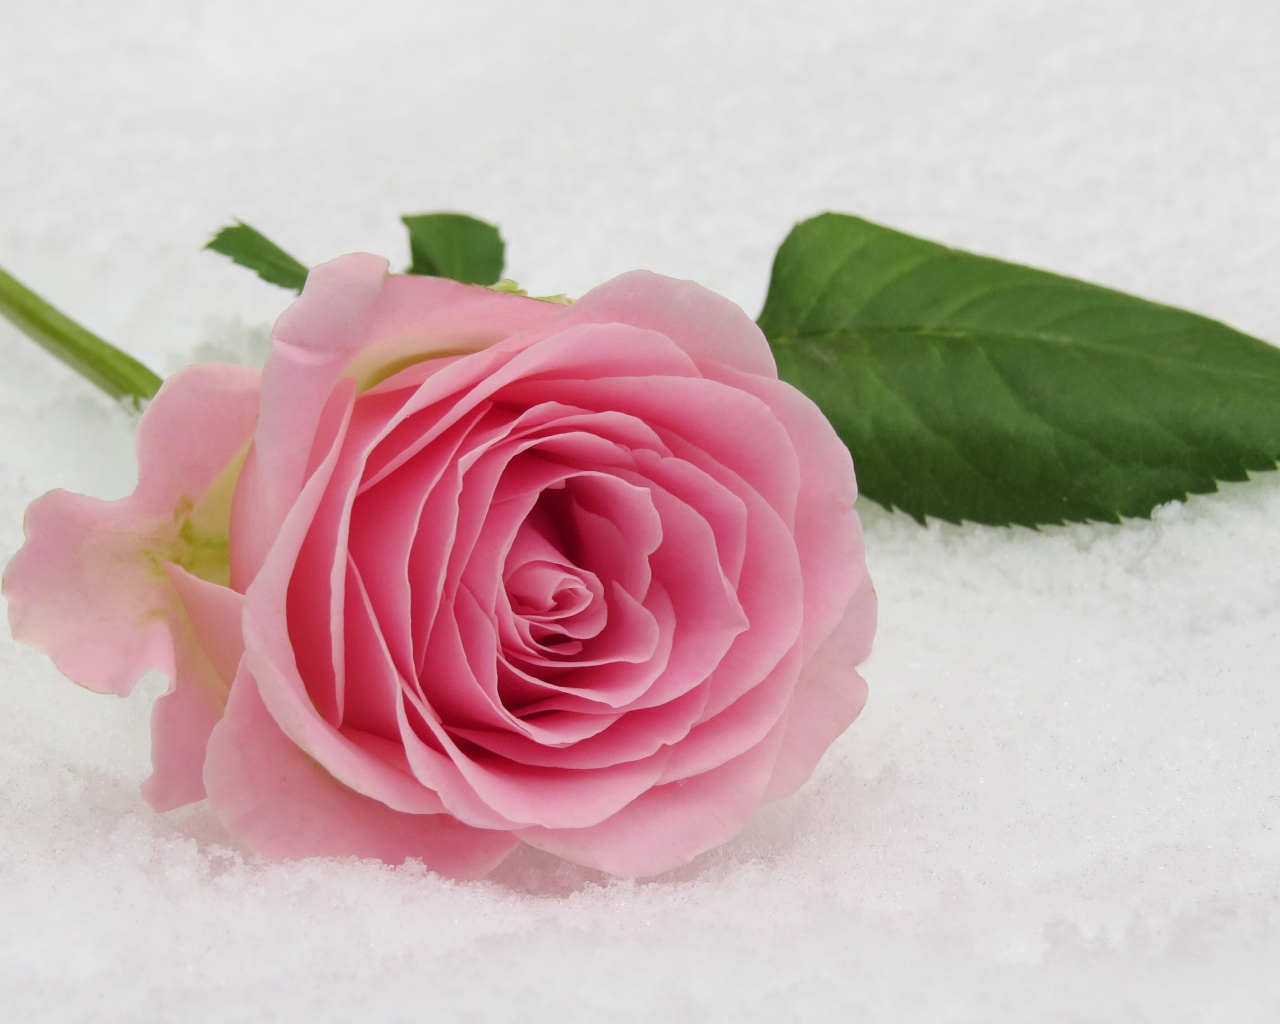 Delicate pink rose flower in the snow